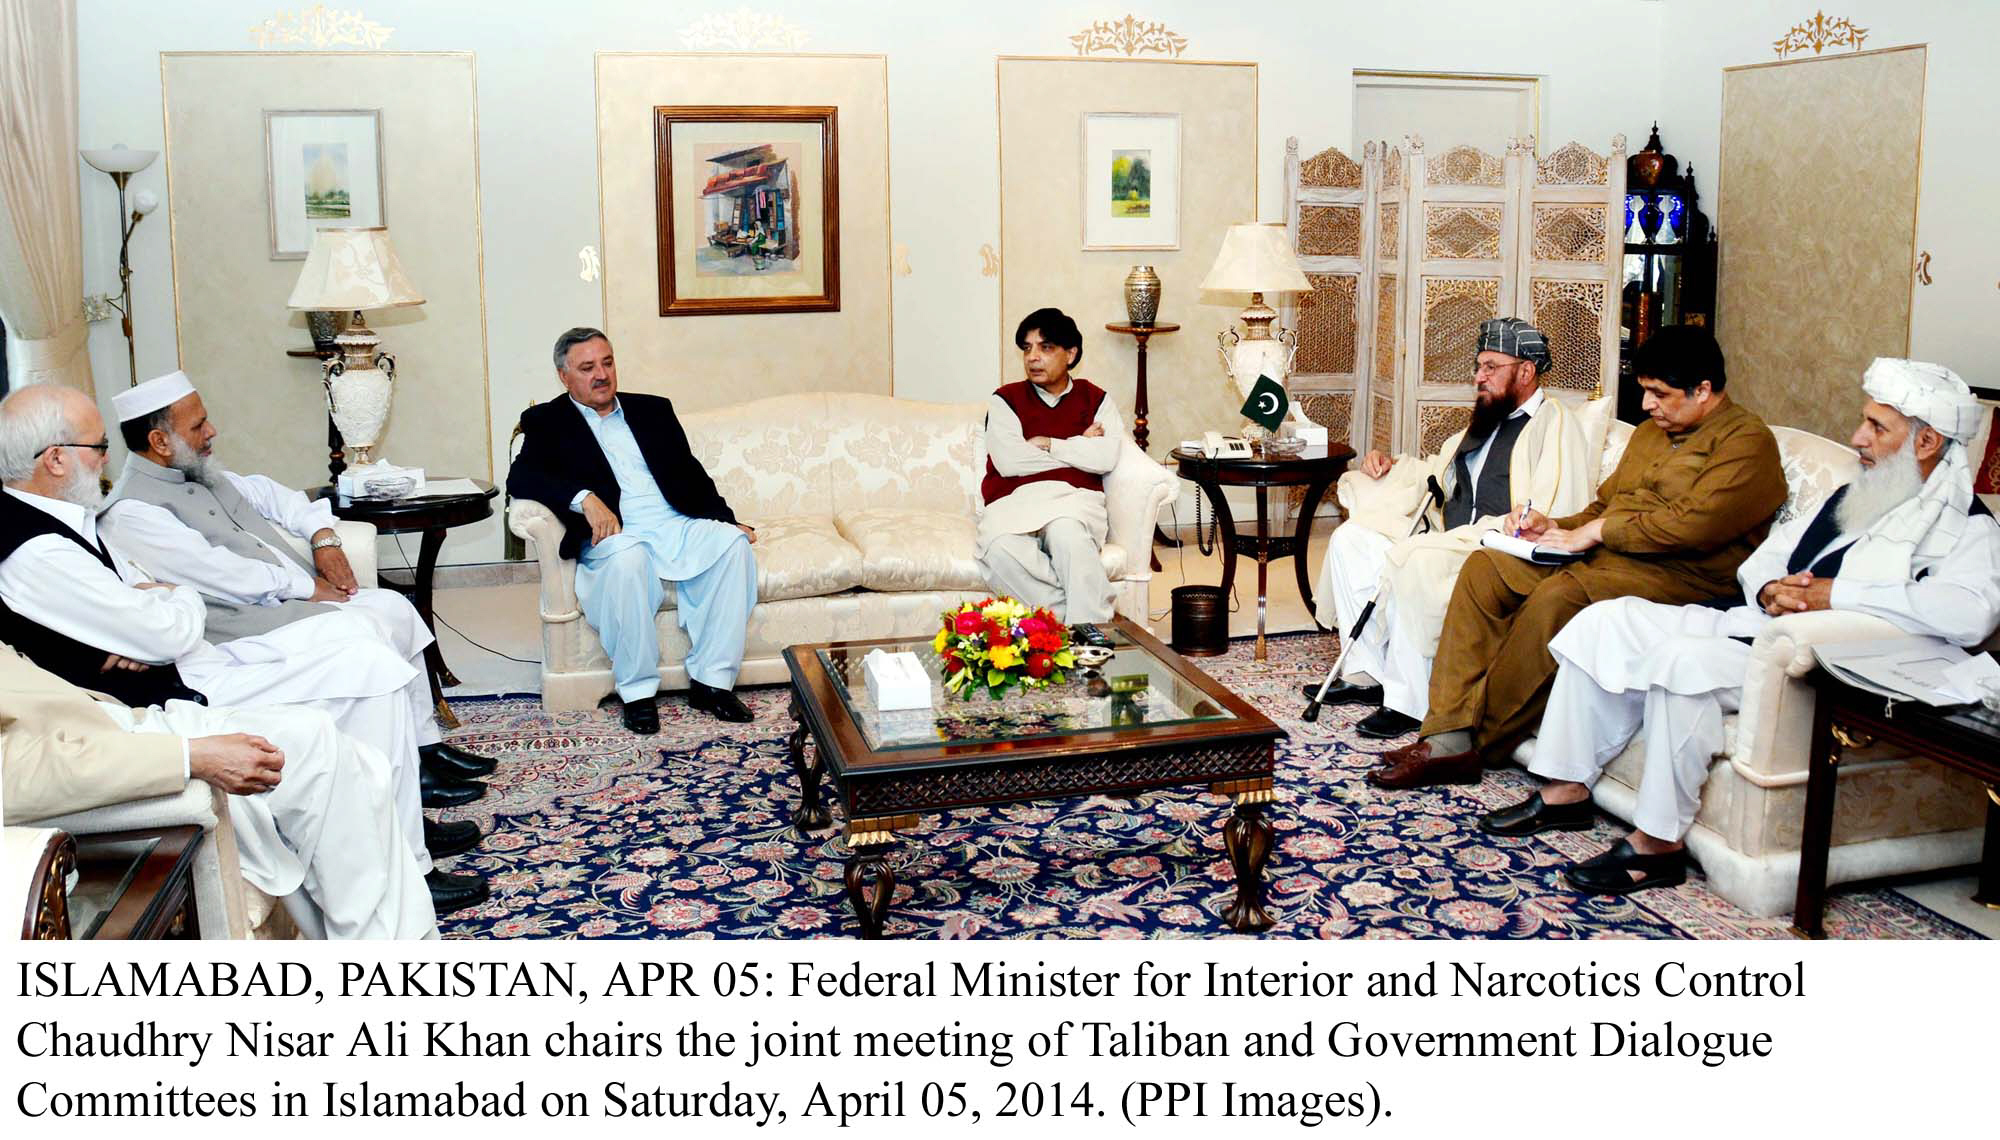 chaudhry nisar in a joint meeting of the government and taliban committees in islamabad on saturday photo ppi